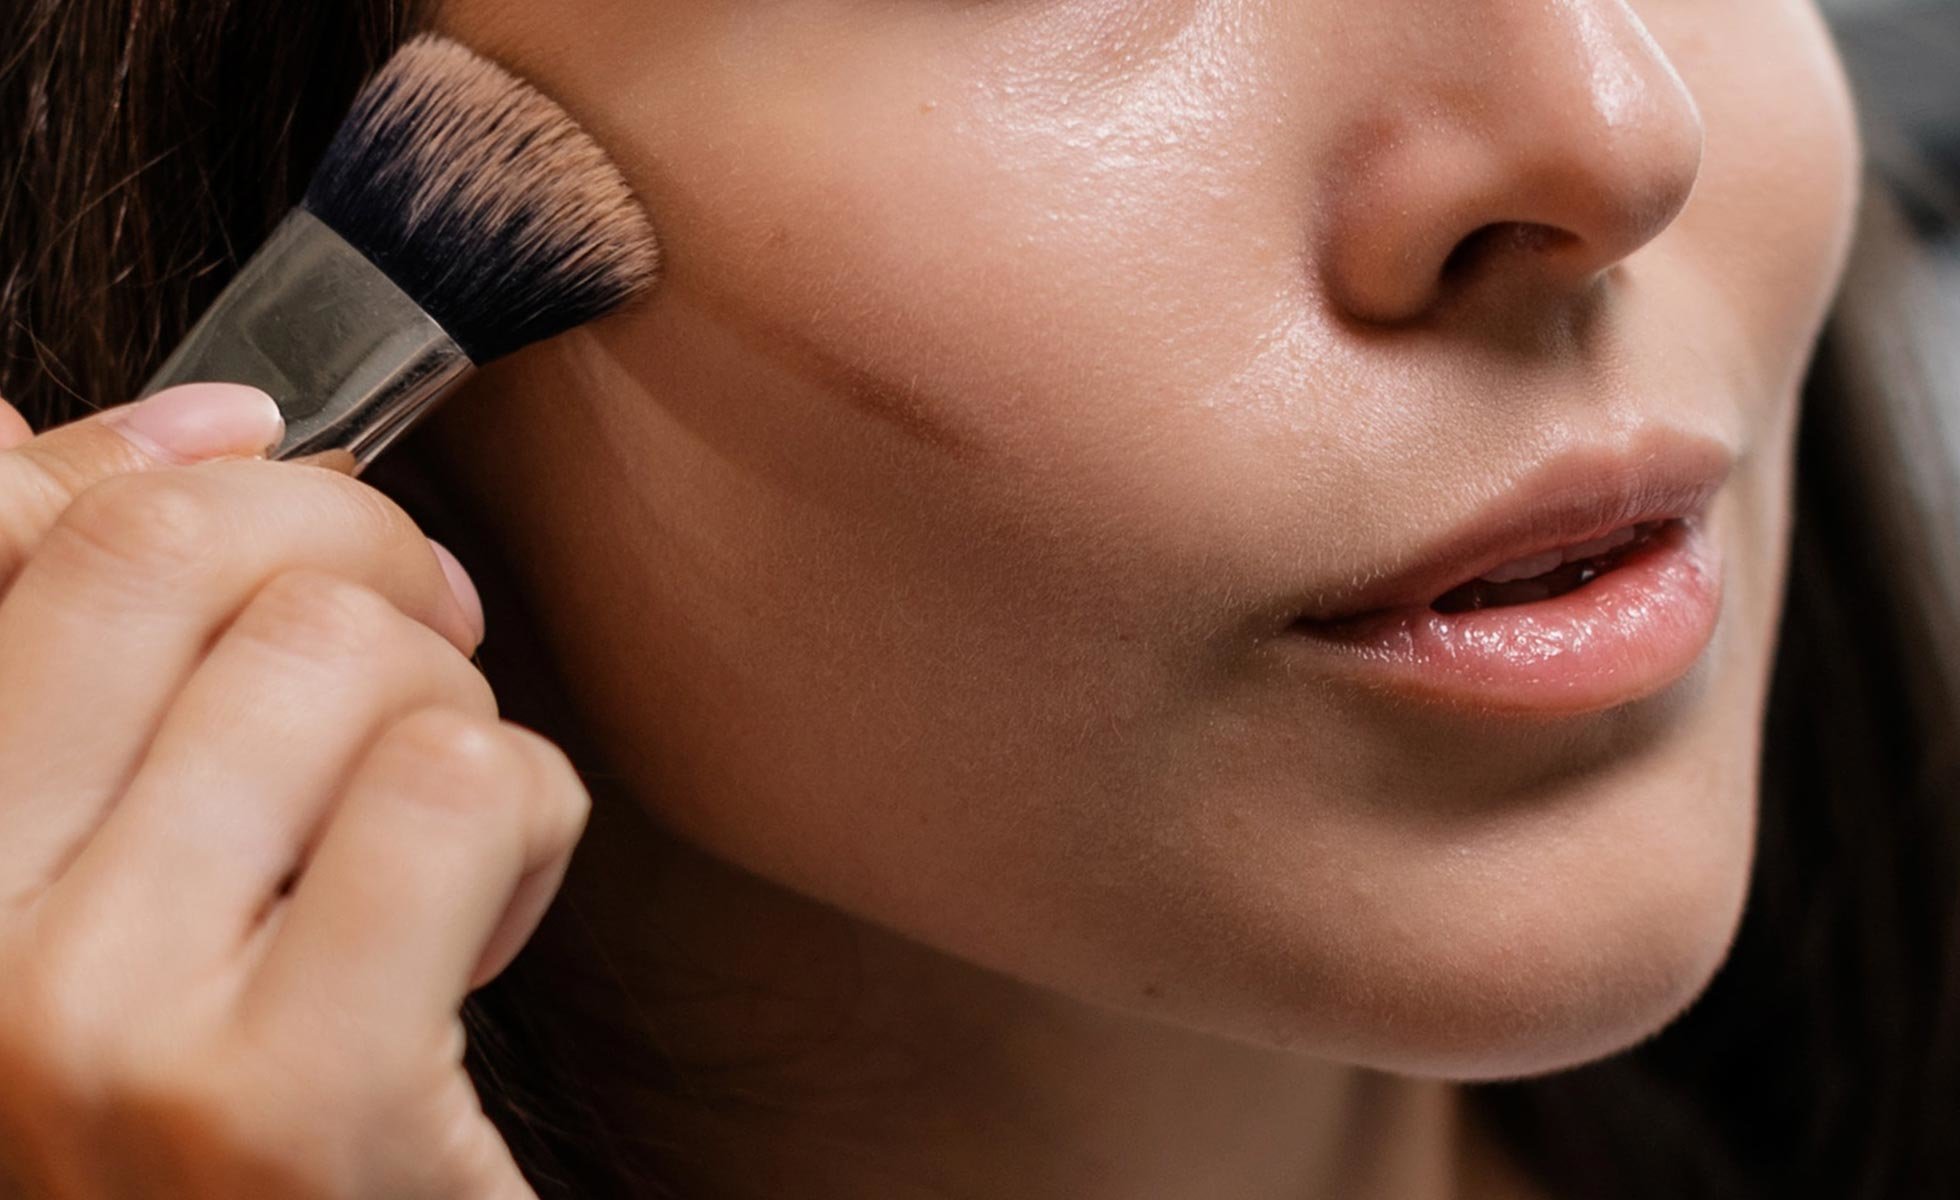 Here's Your Sign To Stop Contouring With Bronzer